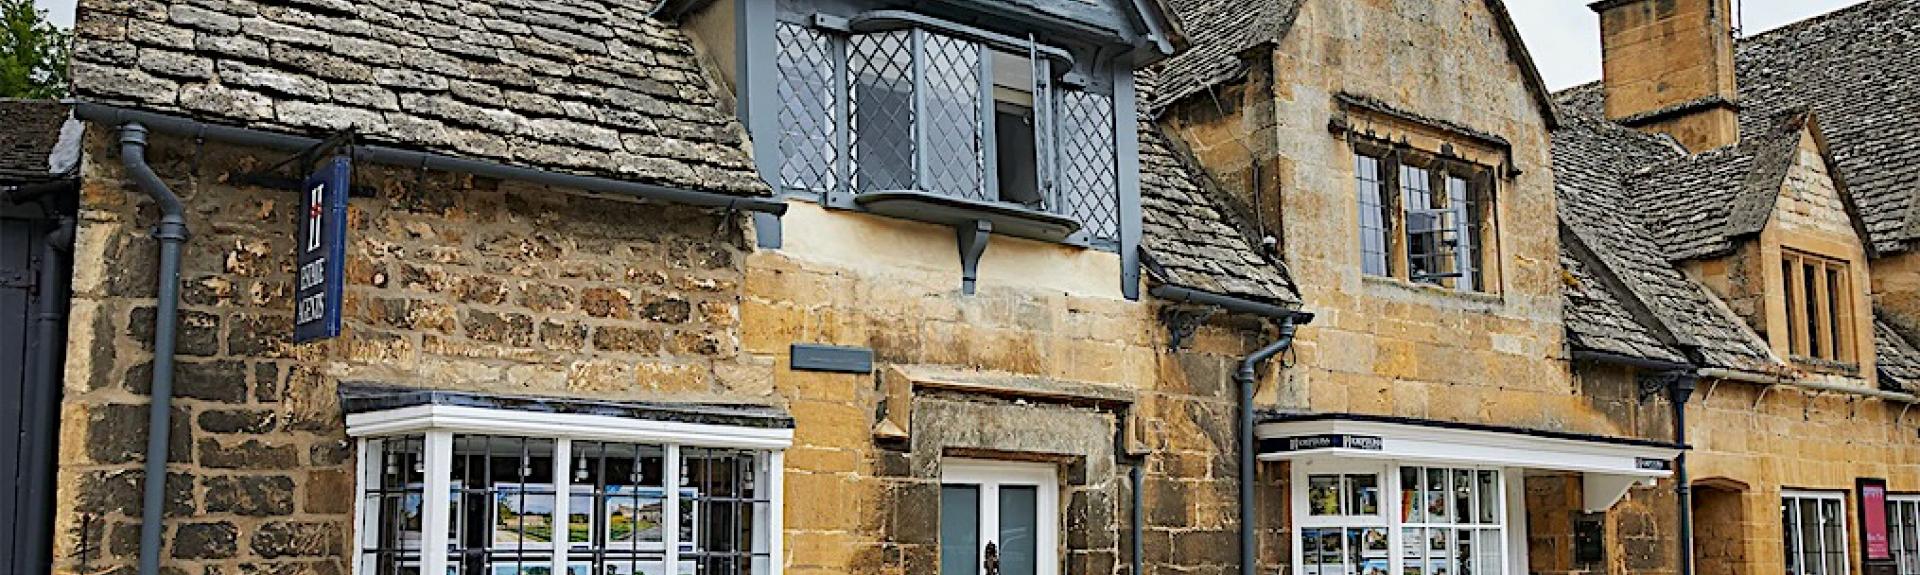 A semi-detached Cotswold holiday cottage with leaded, bay windows overlooks a village street.